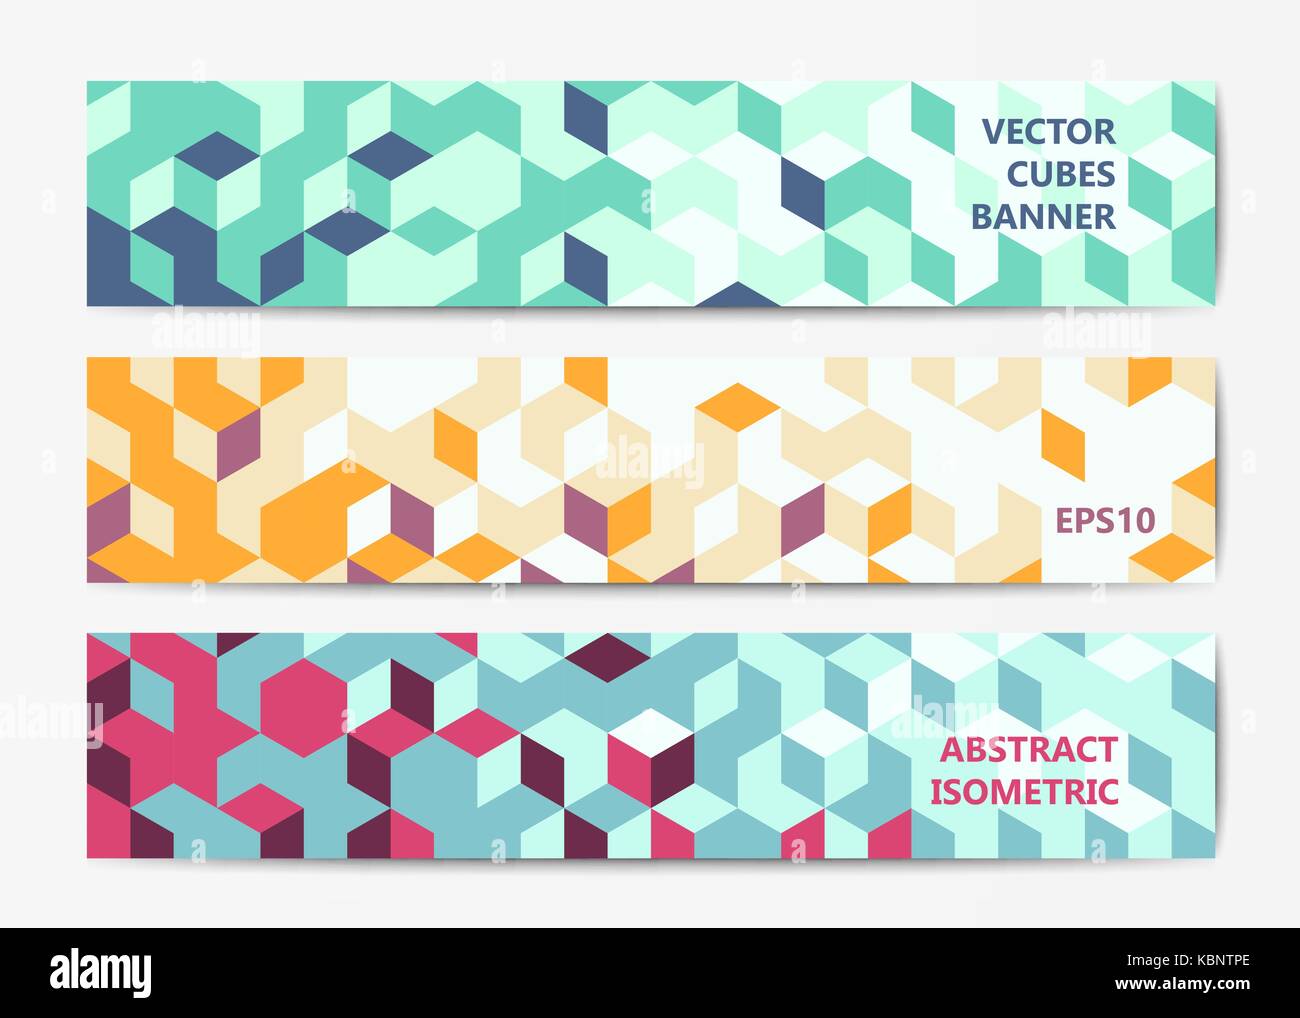 Abstract geometric banner templates Stock Vector